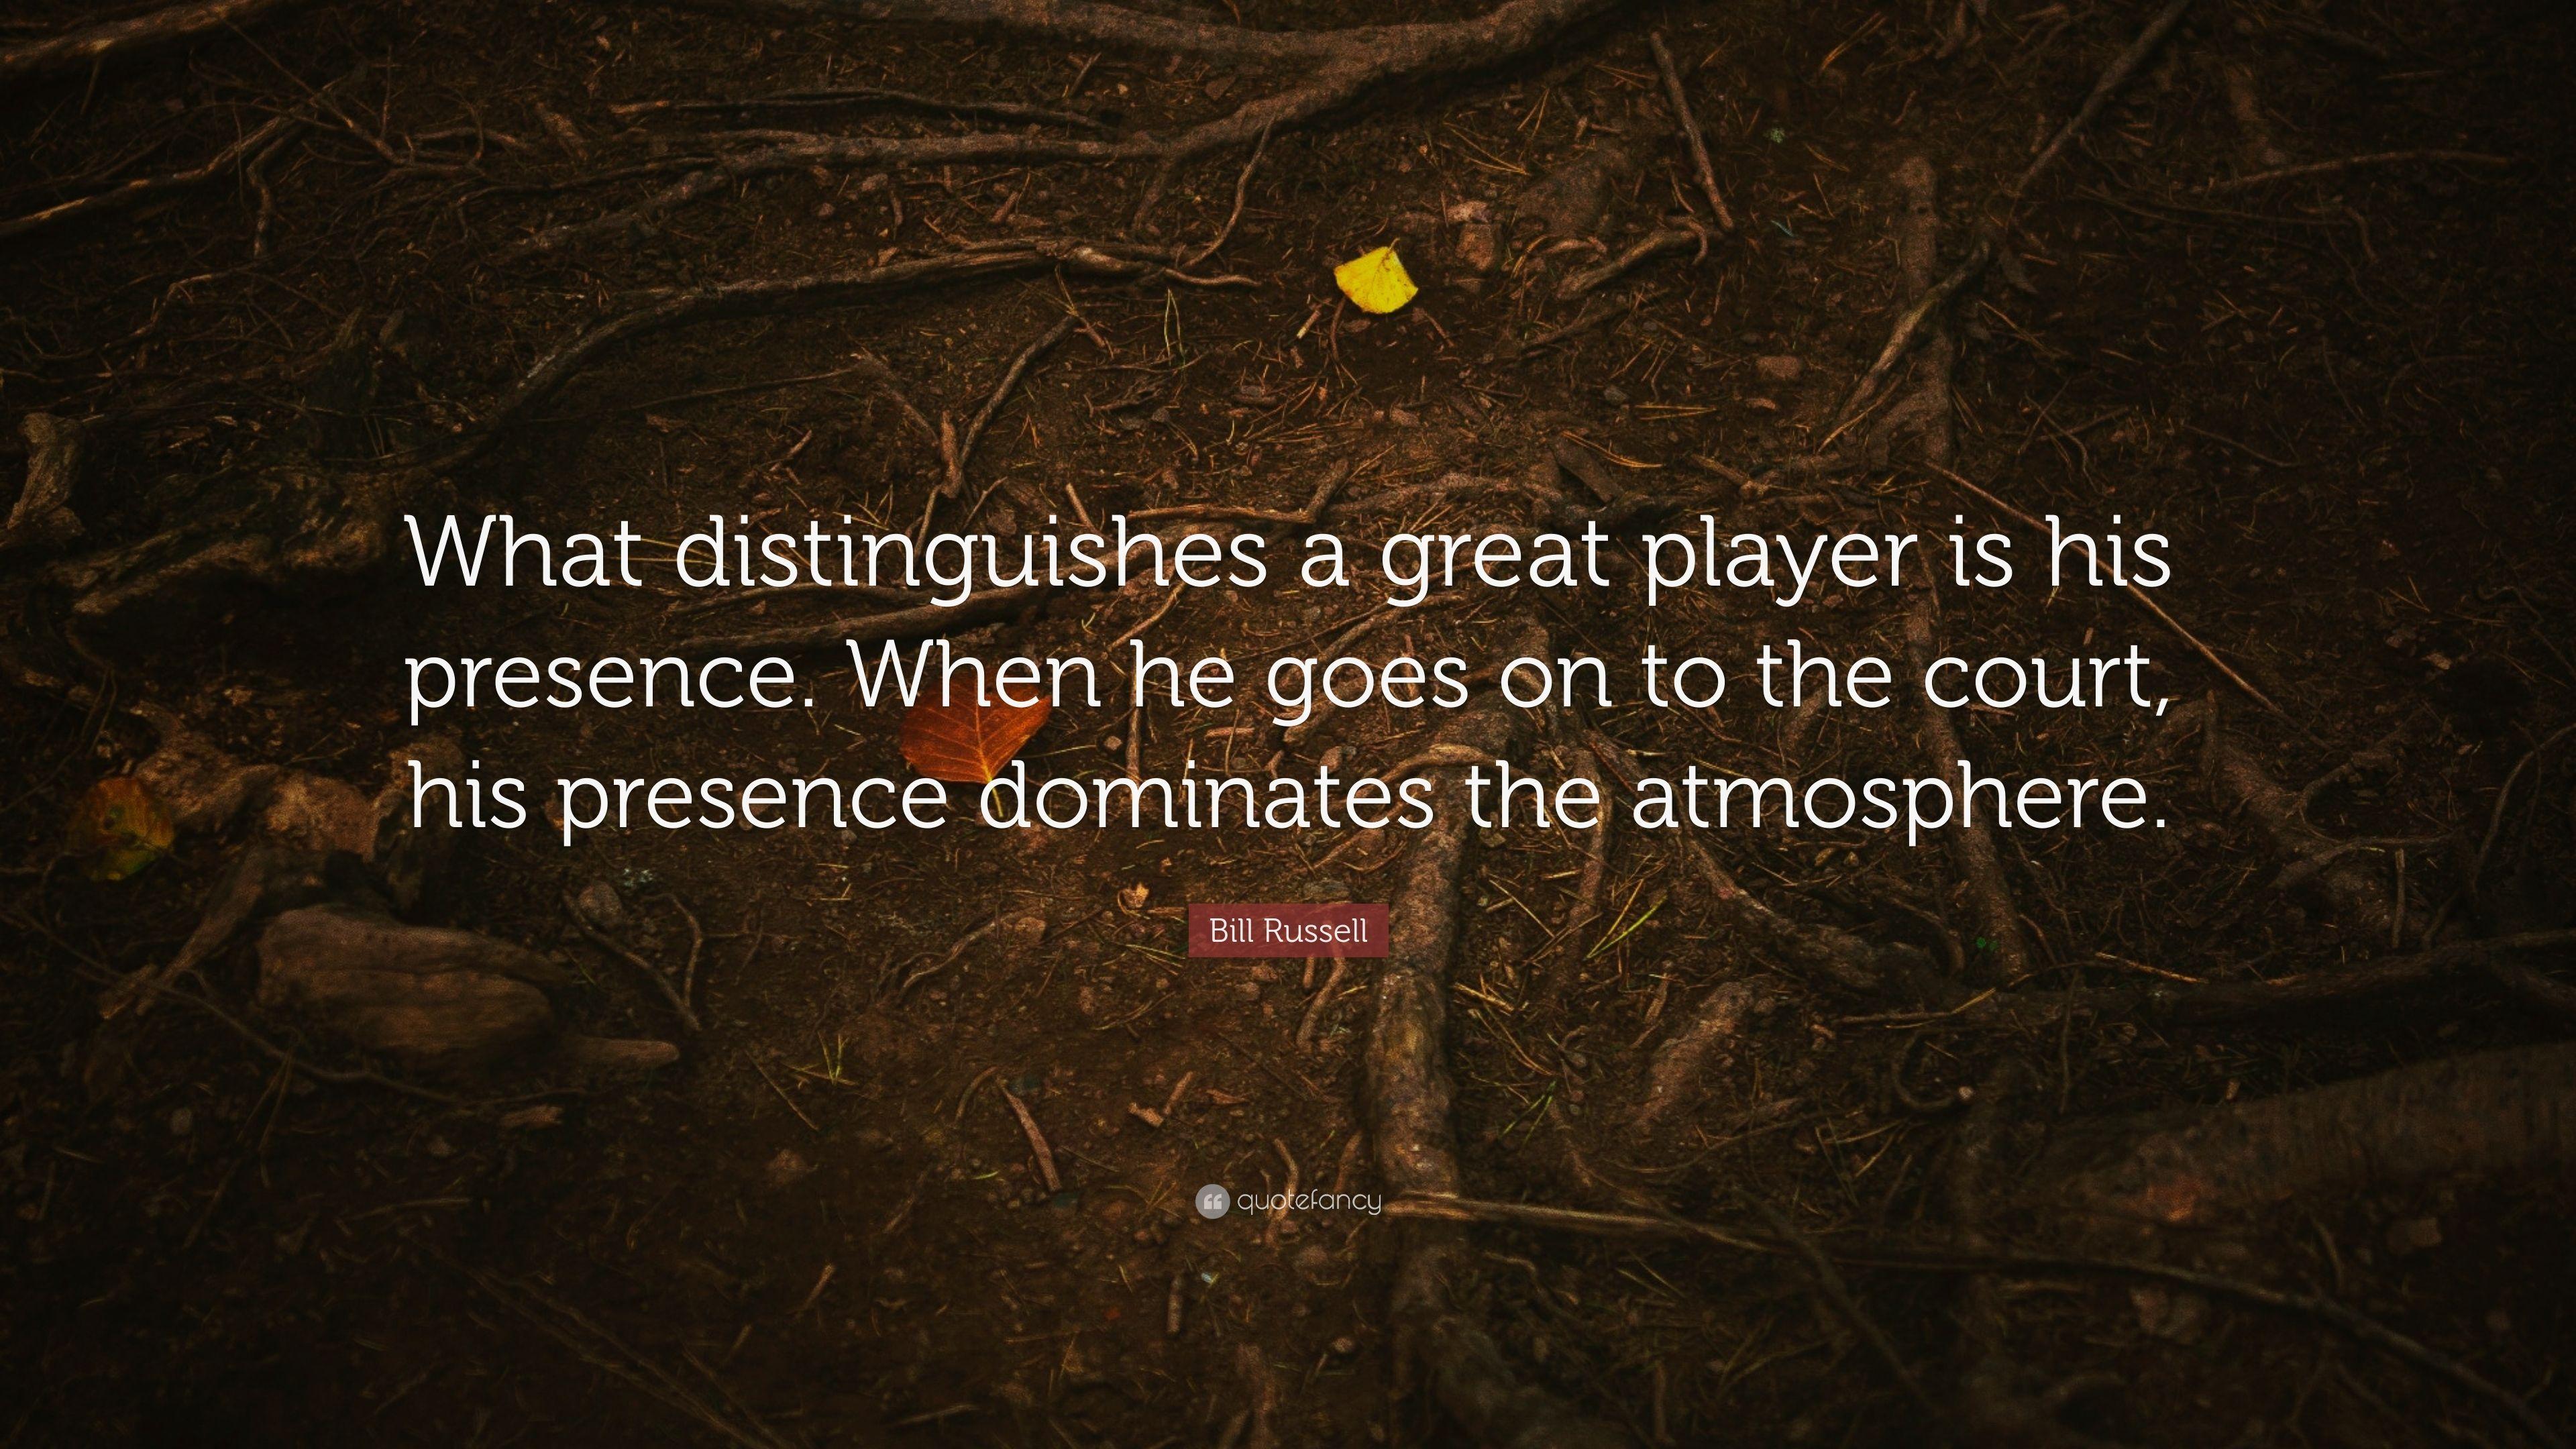 Bill Russell Quote: “What distinguishes a great player is his